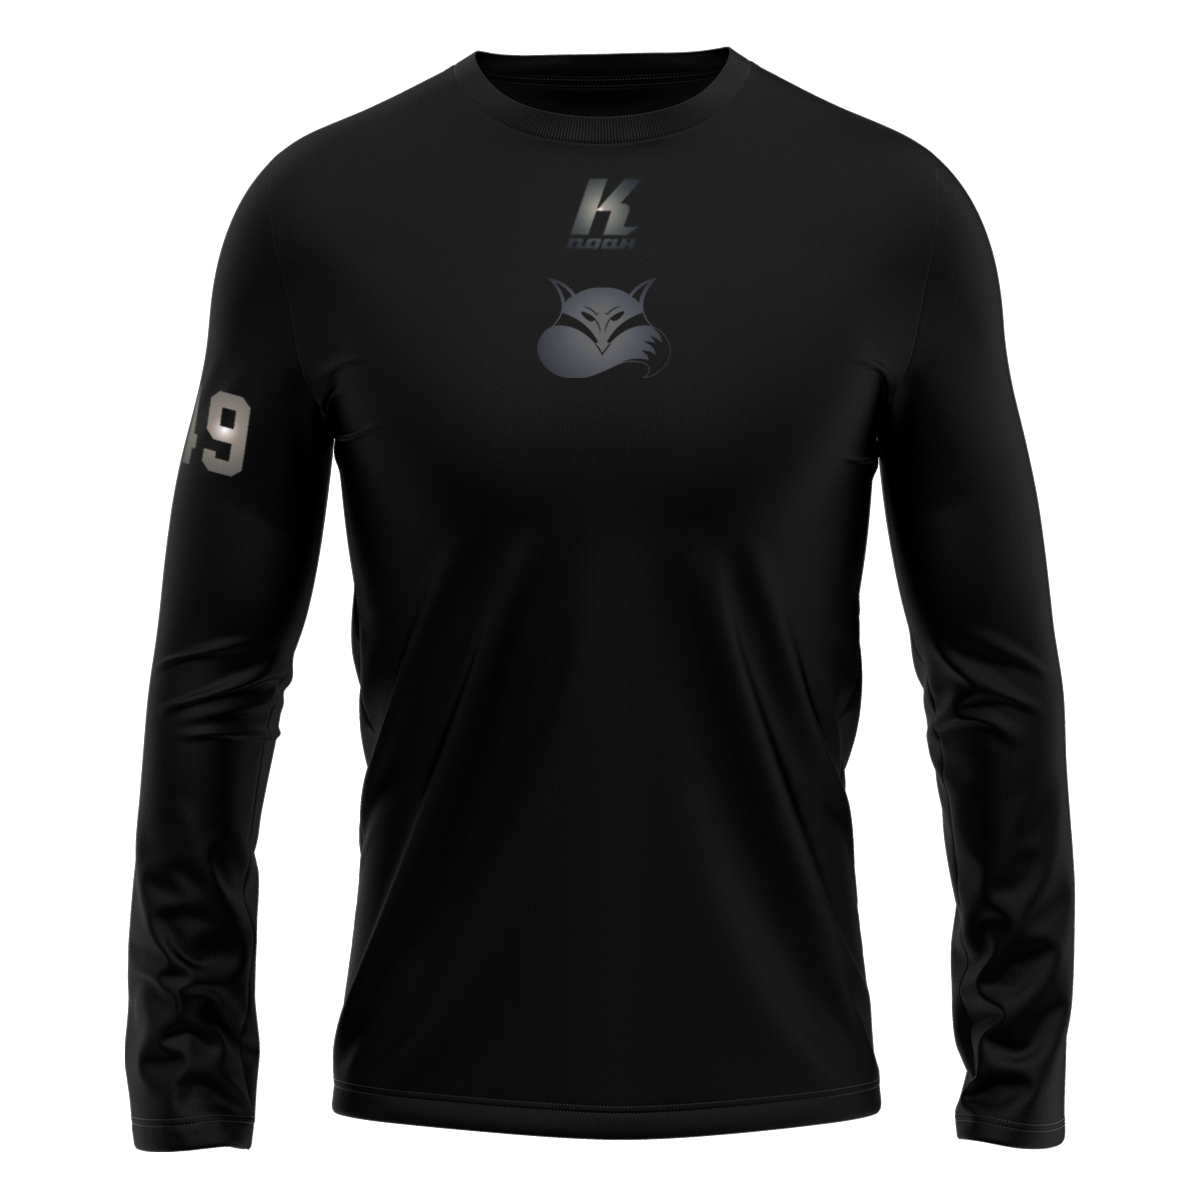 Foxes "Blackline" K.Tech Longsleeve Tee L02071 with Playernumber/Initials